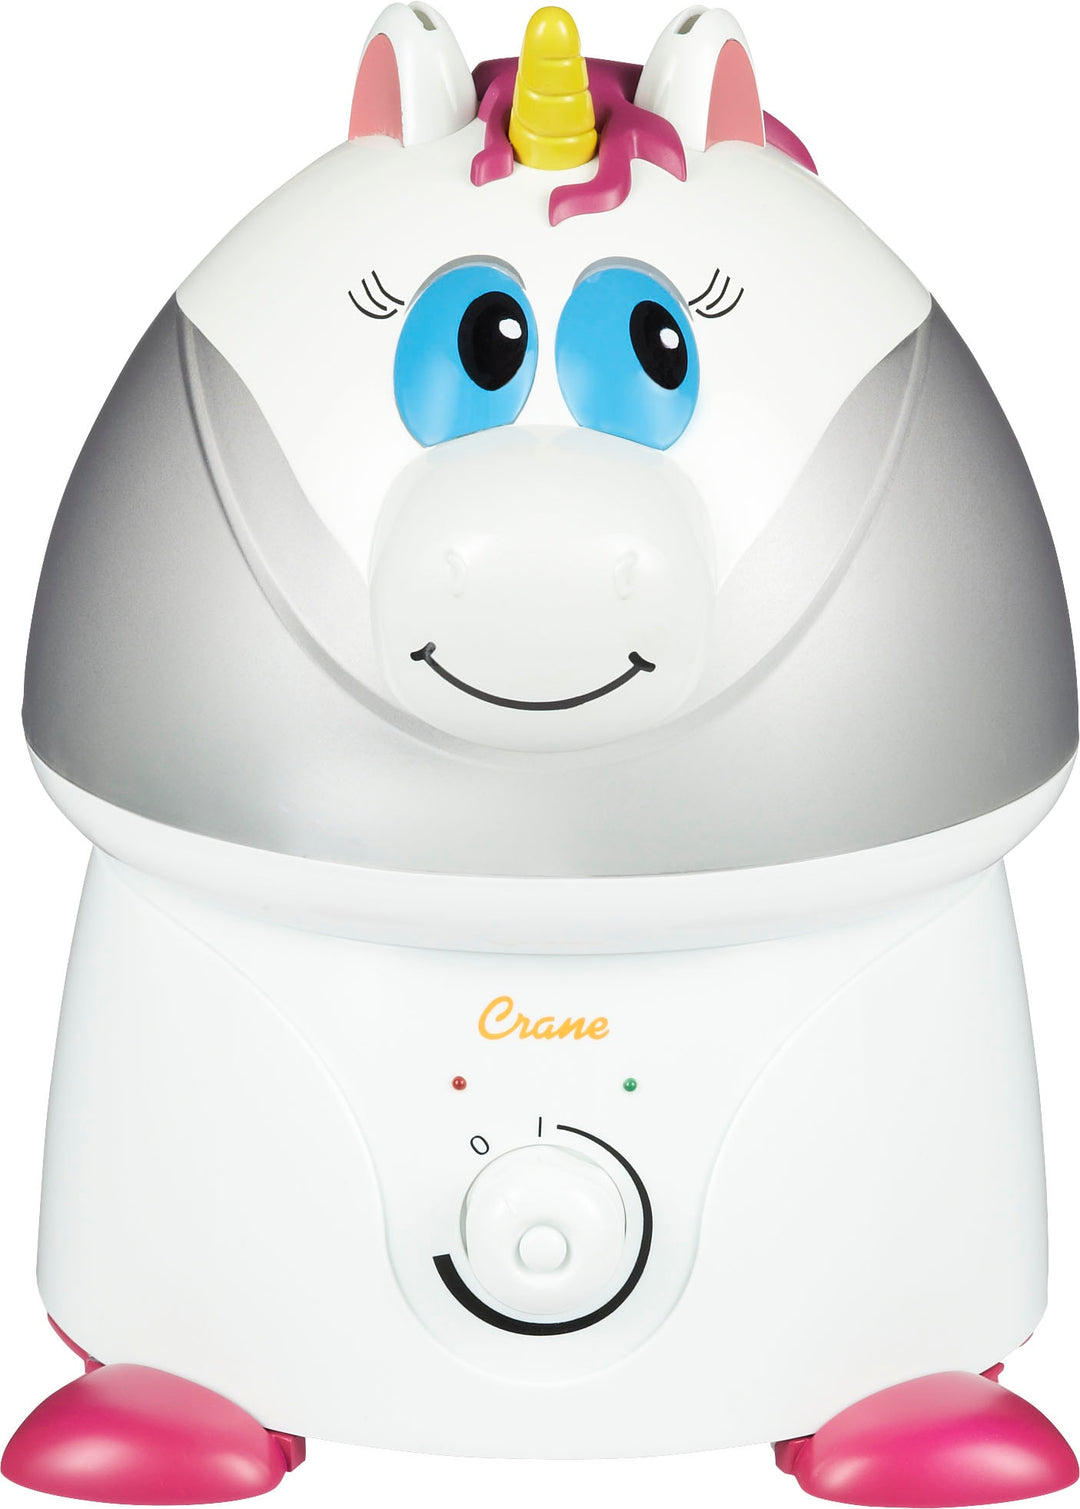 CRANE - 1 Gal. Adorable Ultrasonic Cool Mist Humidifier for Medium to Large Rooms up to 500 sq. ft. - Unicorn - White/Pink_1